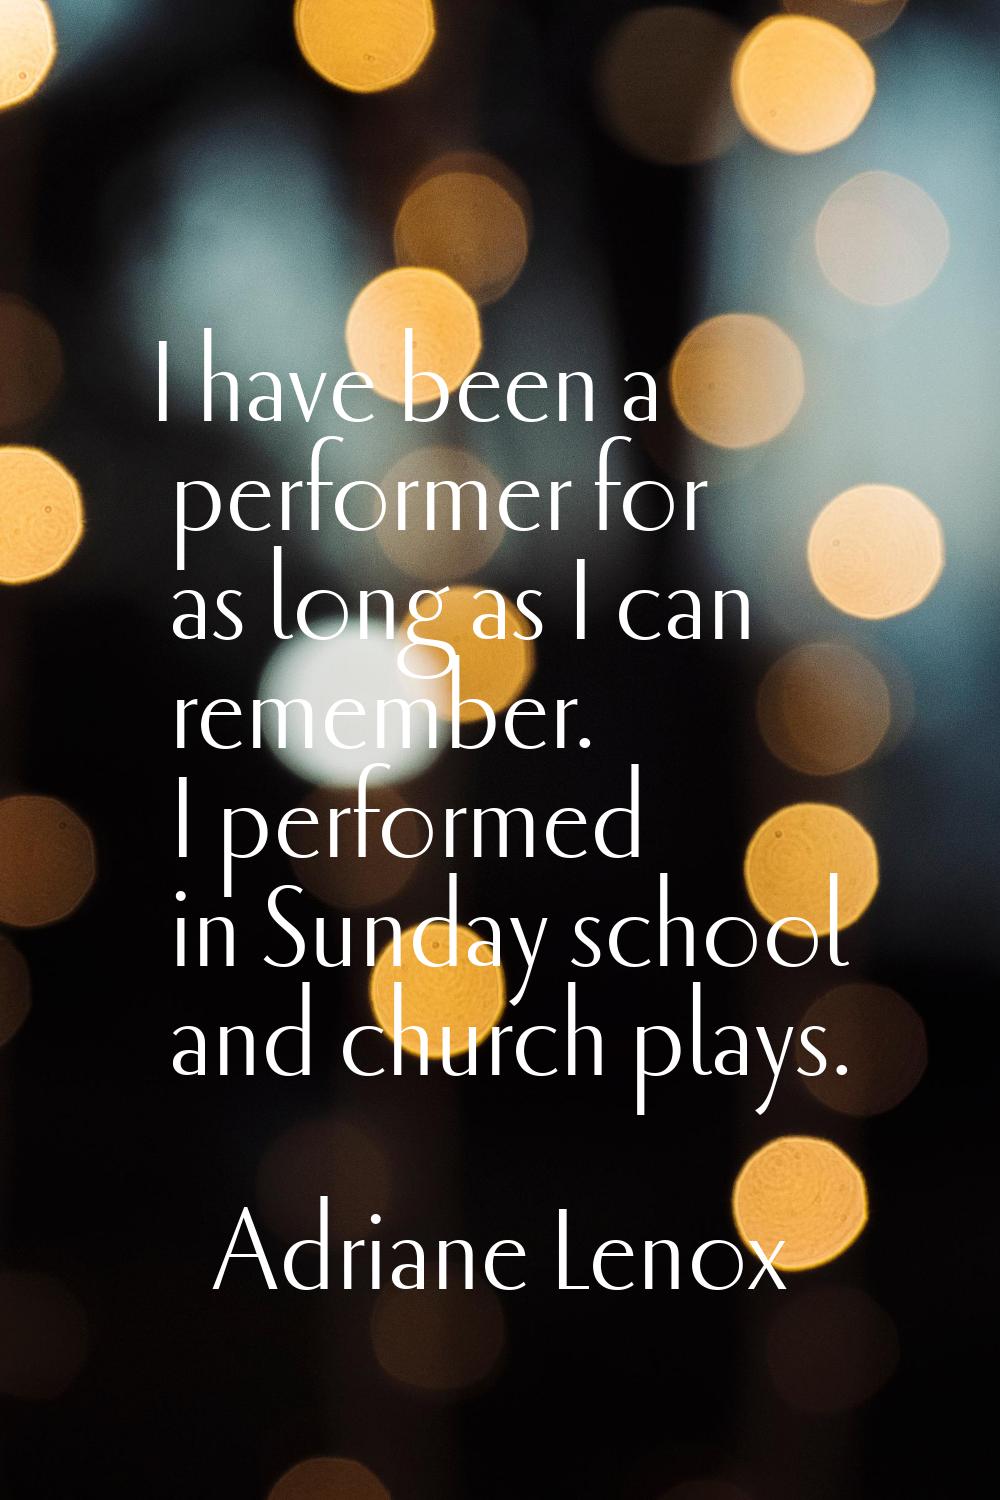 I have been a performer for as long as I can remember. I performed in Sunday school and church play